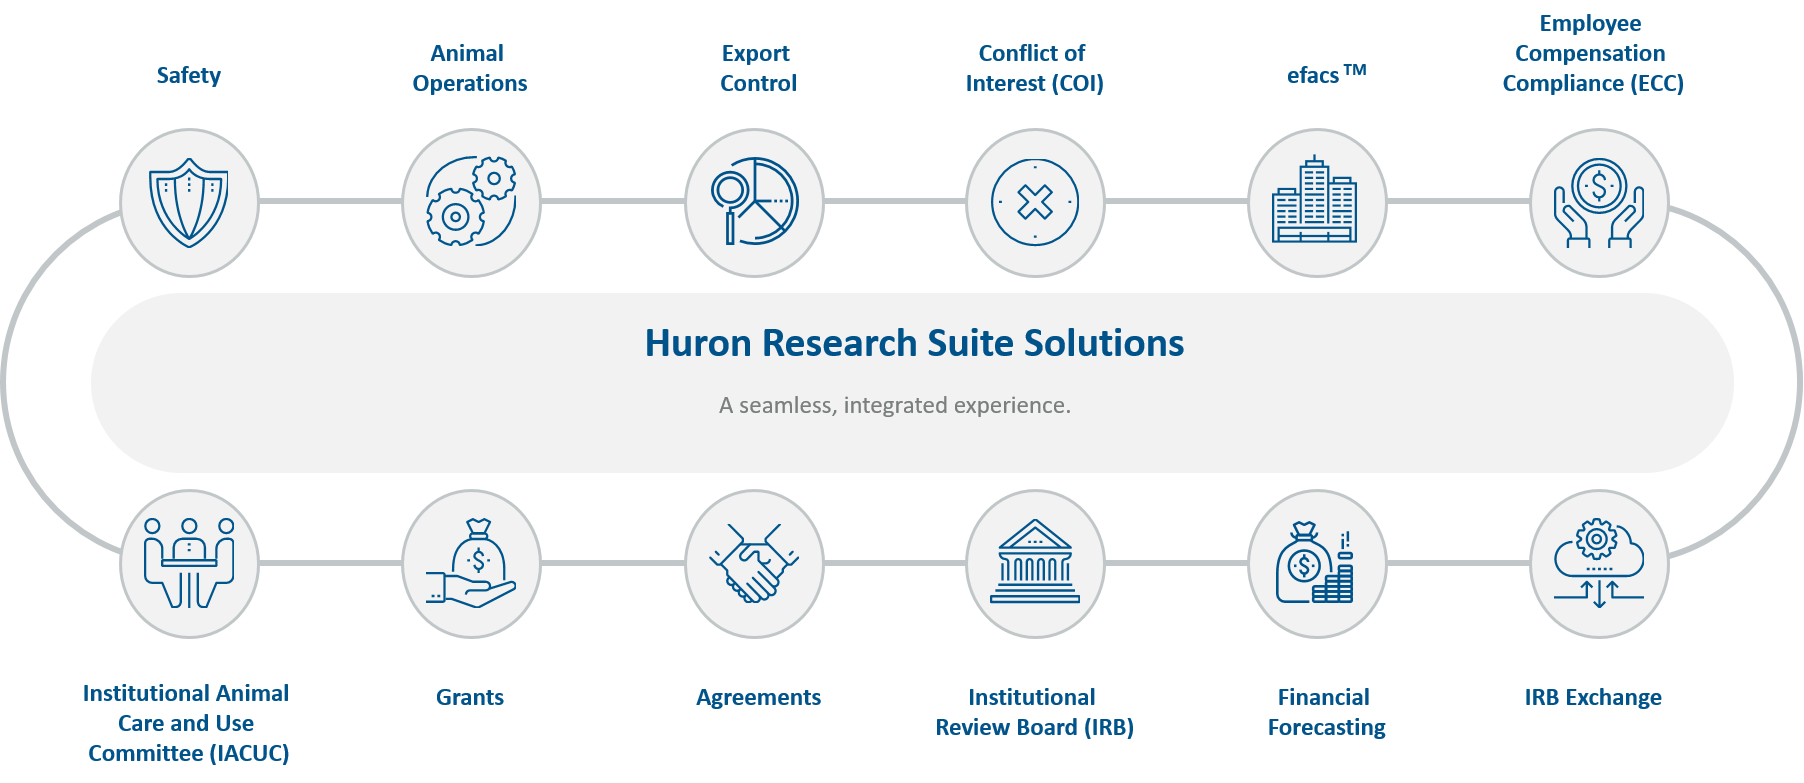 Huron Research Suite Solutions: A seamless, integrated experience.